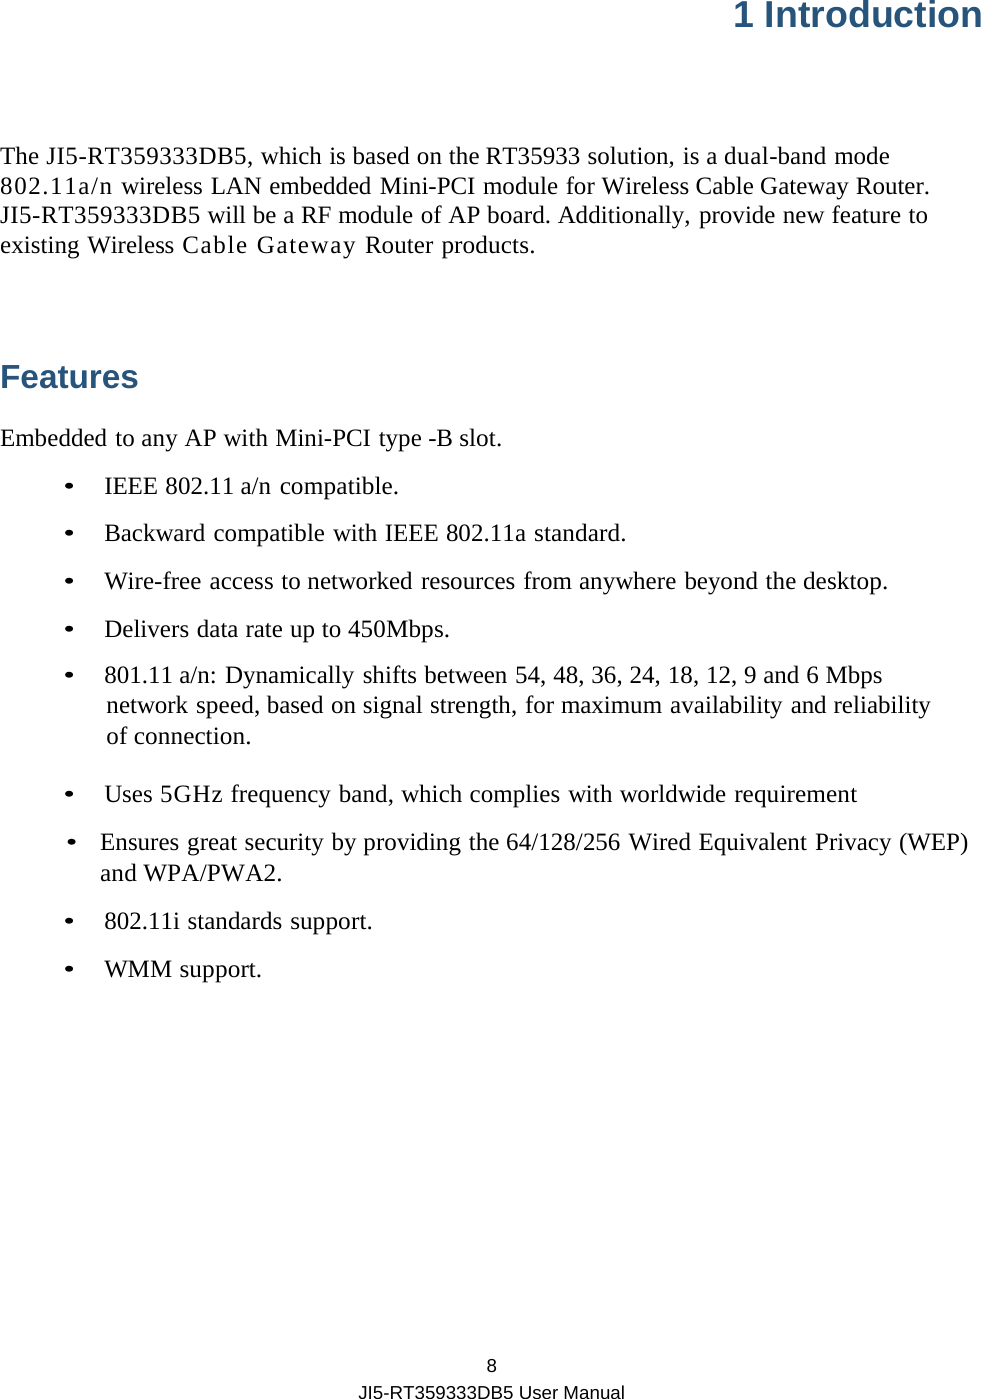  8 JI5-RT359333DB5 User Manual 1 Introduction  The JI5-RT359333DB5, which is based on the RT35933 solution, is a dual-band mode 802.11a/n wireless LAN embedded Mini-PCI module for Wireless Cable Gateway Router. JI5-RT359333DB5 will be a RF module of AP board. Additionally, provide new feature to existing Wireless Cable Gateway Router products.  Features Embedded to any AP with Mini-PCI type -B slot. • IEEE 802.11 a/n compatible. •  Backward compatible with IEEE 802.11a standard. •  Wire-free access to networked resources from anywhere beyond the desktop. •  Delivers data rate up to 450Mbps. • 801.11 a/n: Dynamically shifts between 54, 48, 36, 24, 18, 12, 9 and 6 Mbps network speed, based on signal strength, for maximum availability and reliability of connection. •  Uses 5GHz frequency band, which complies with worldwide requirement •  Ensures great security by providing the 64/128/256 Wired Equivalent Privacy (WEP) and WPA/PWA2. • 802.11i standards support. • WMM support.    